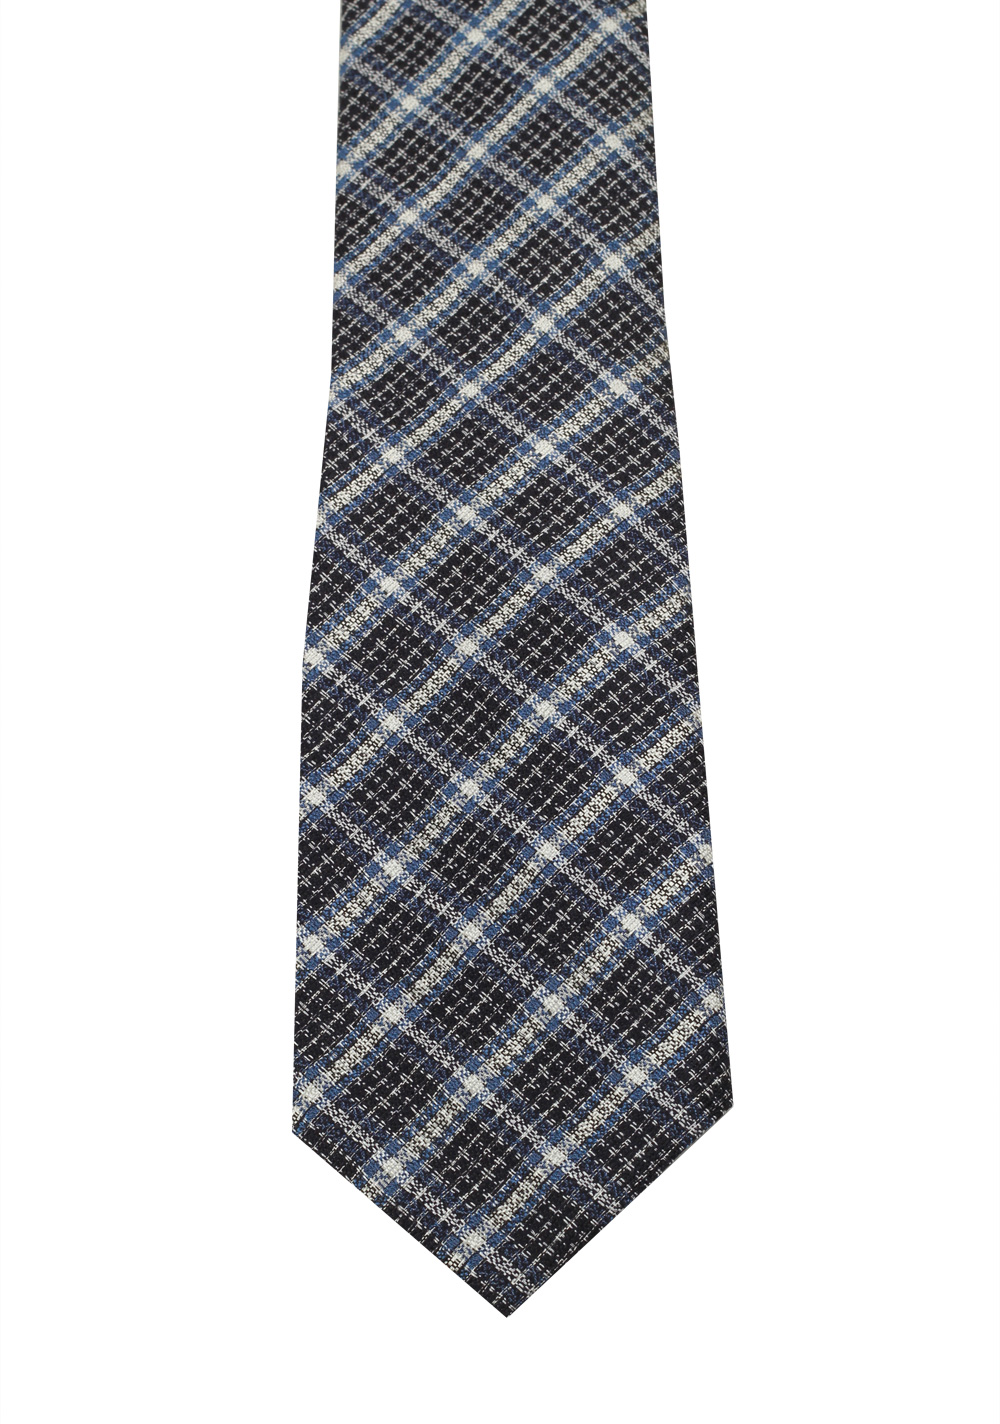 TOM FORD Checked Blue Black White Tie In Silk | Costume Limité